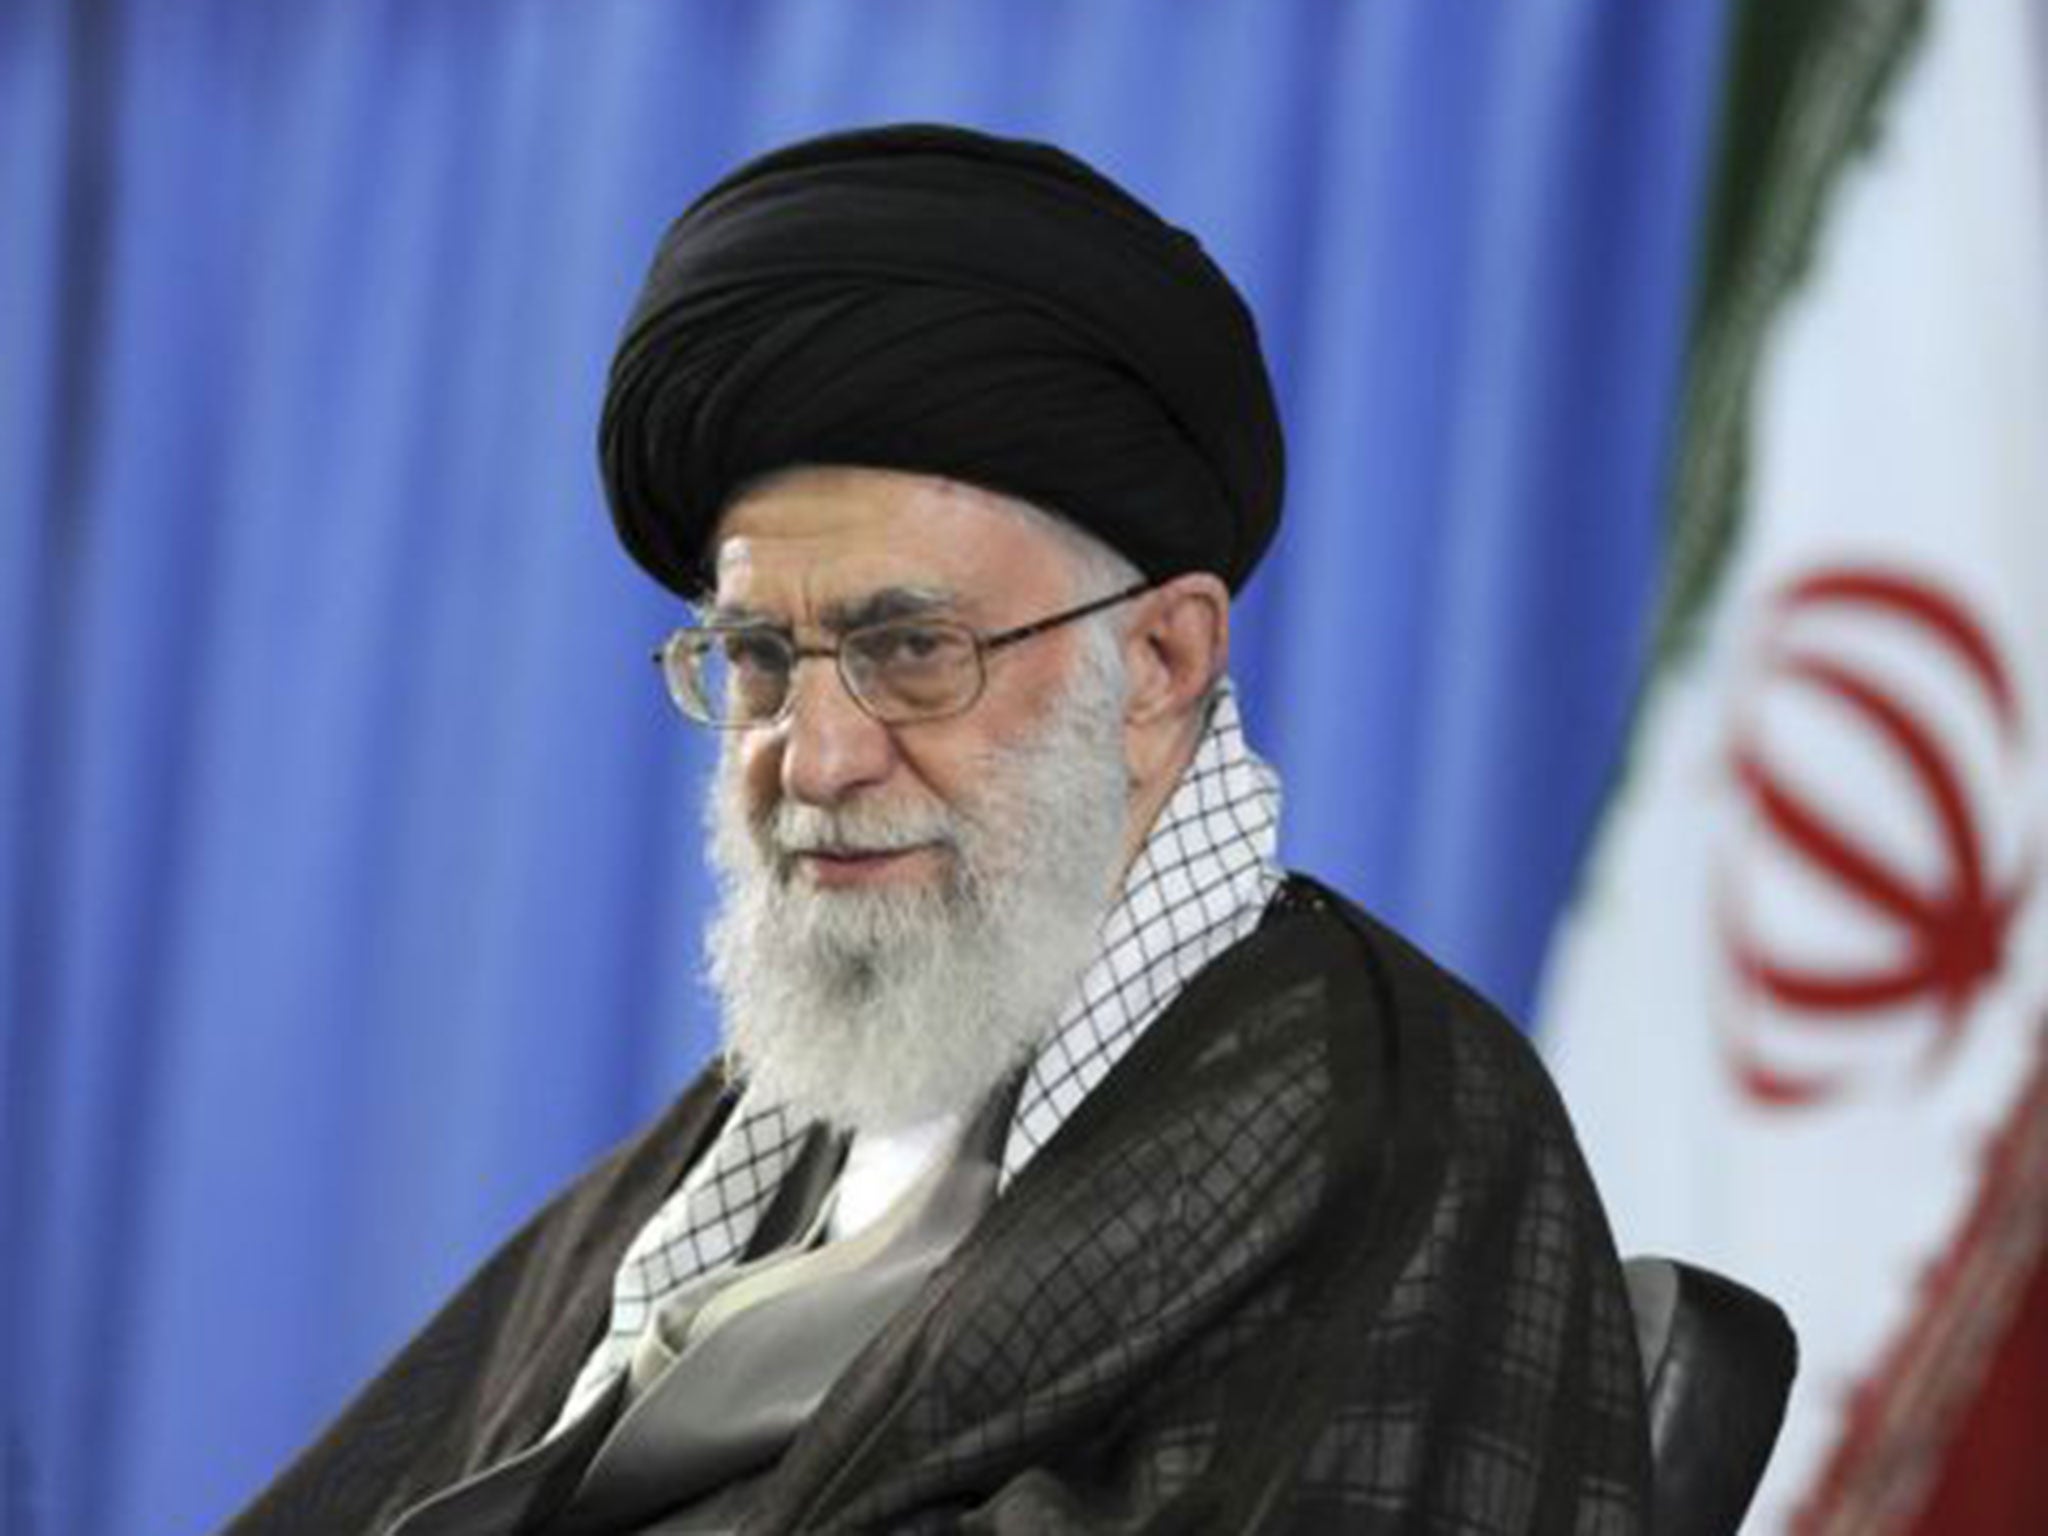 &#13;
Ayatollah Ali Khamenei said the country’s enemies were fostering division within Iran &#13;